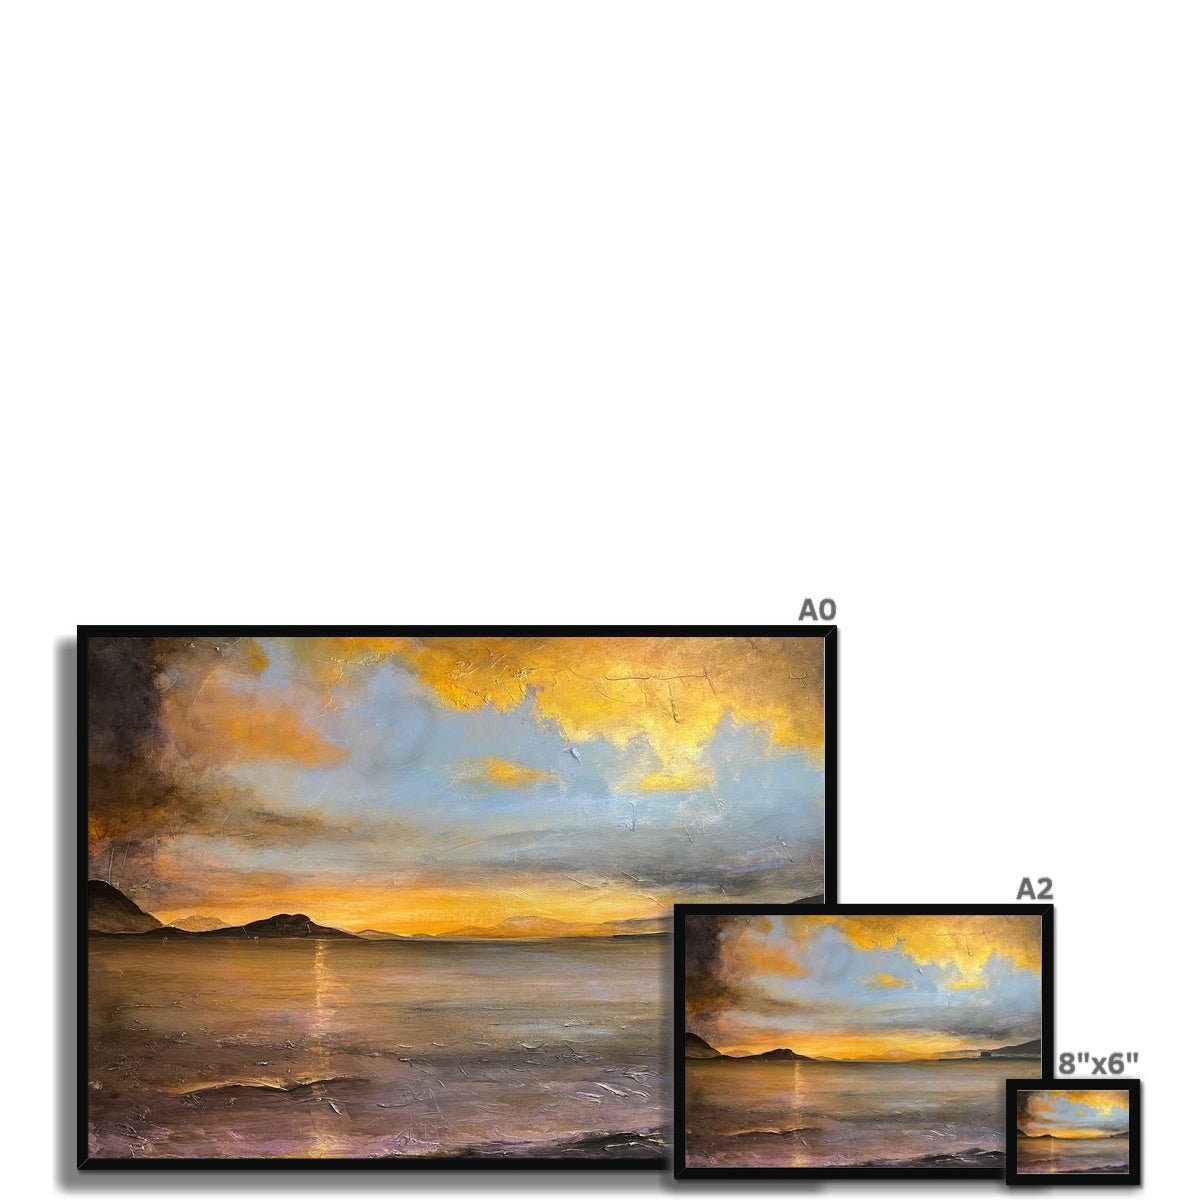 Loch Linnhe Sunset Painting | Framed Prints From Scotland-Framed Prints-Scottish Lochs & Mountains Art Gallery-Paintings, Prints, Homeware, Art Gifts From Scotland By Scottish Artist Kevin Hunter